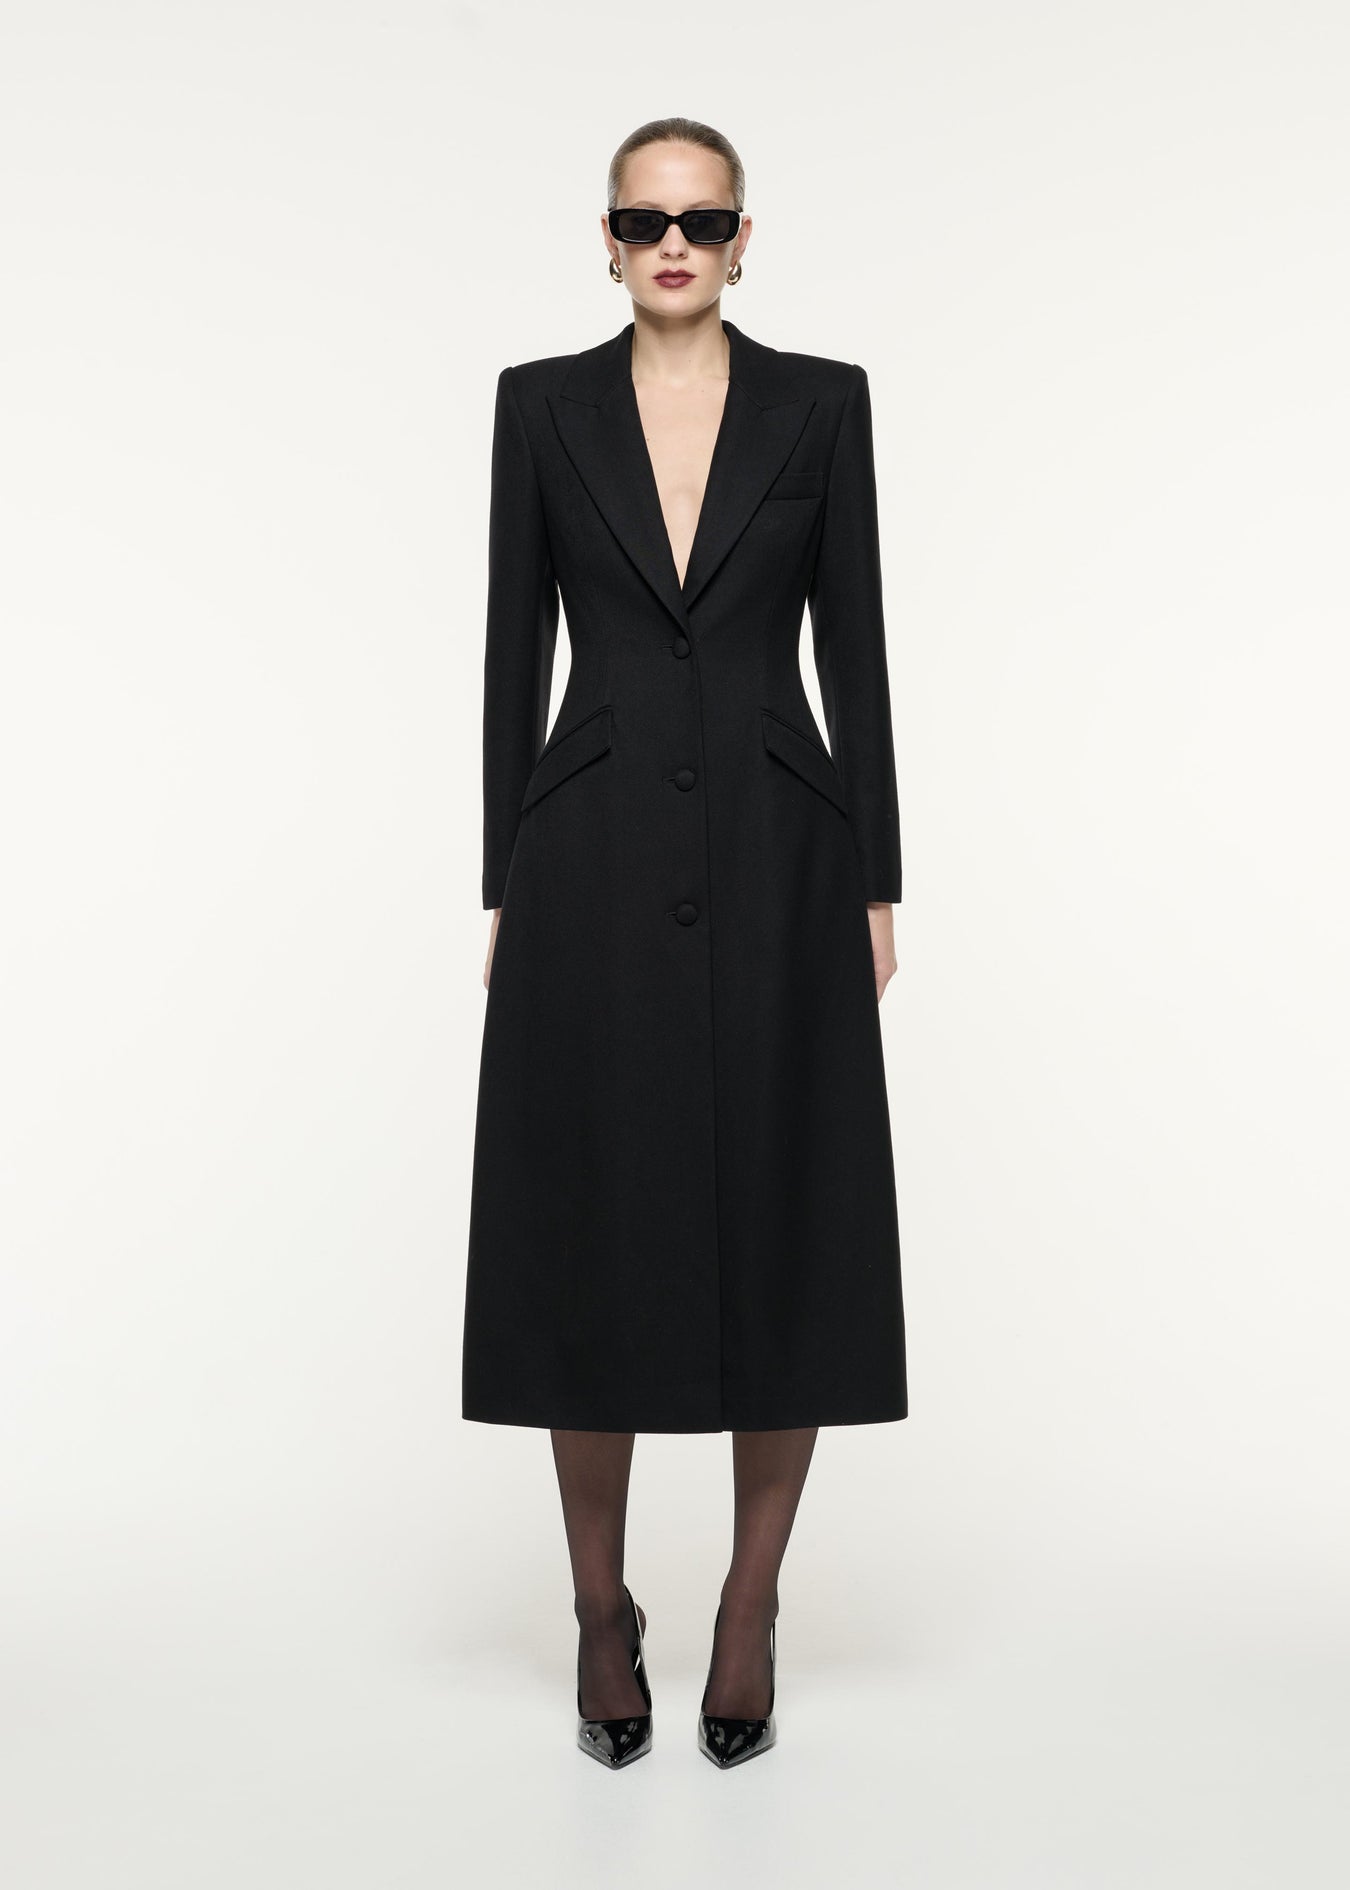 A front view image of a model wearing the Wool Twill Tailored Coat in Black